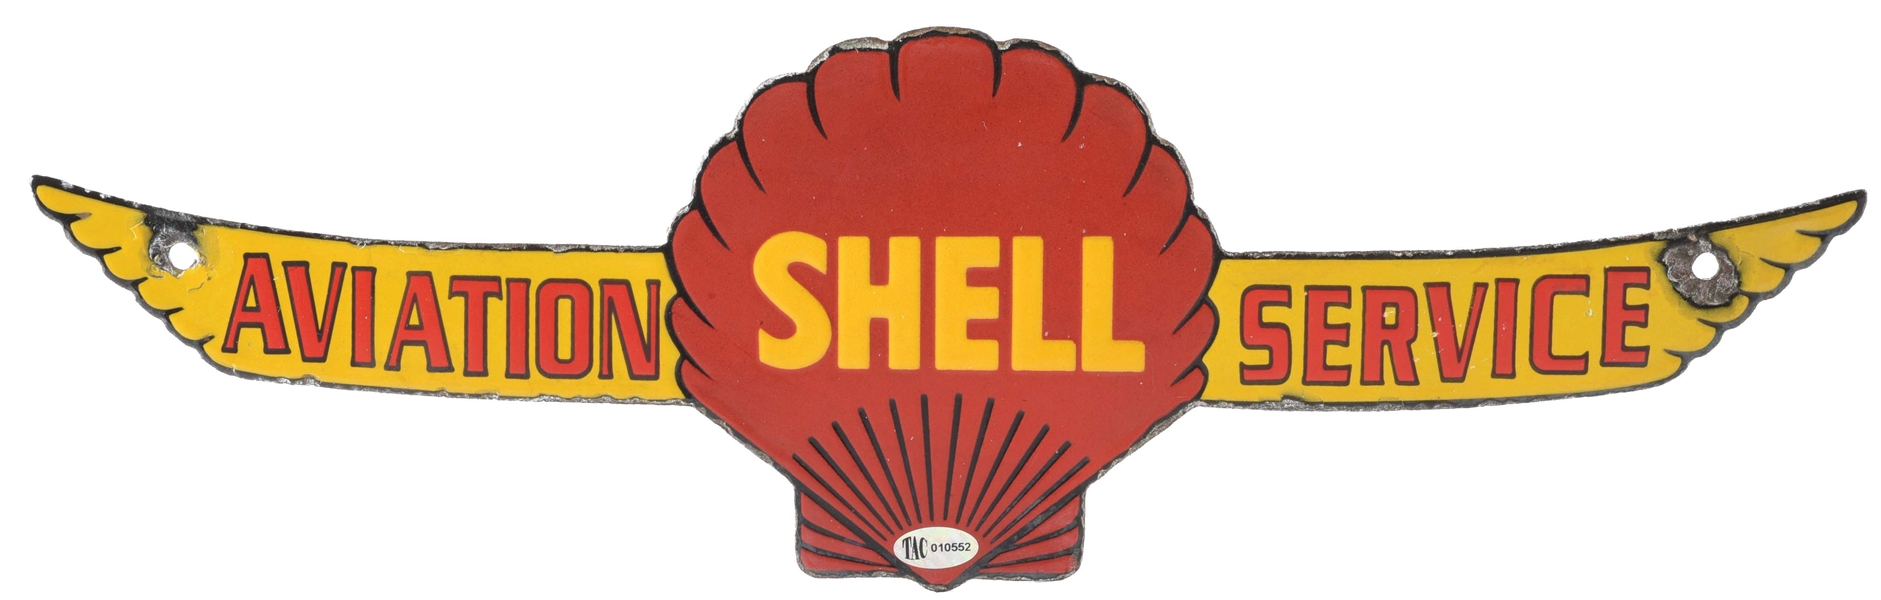 RARE & OUTSTANDING SHELL AVIATION SERVICE DIE-CUT PORCELAIN SIGN W/ CLAMSHELL & WING GRAPHICS. 